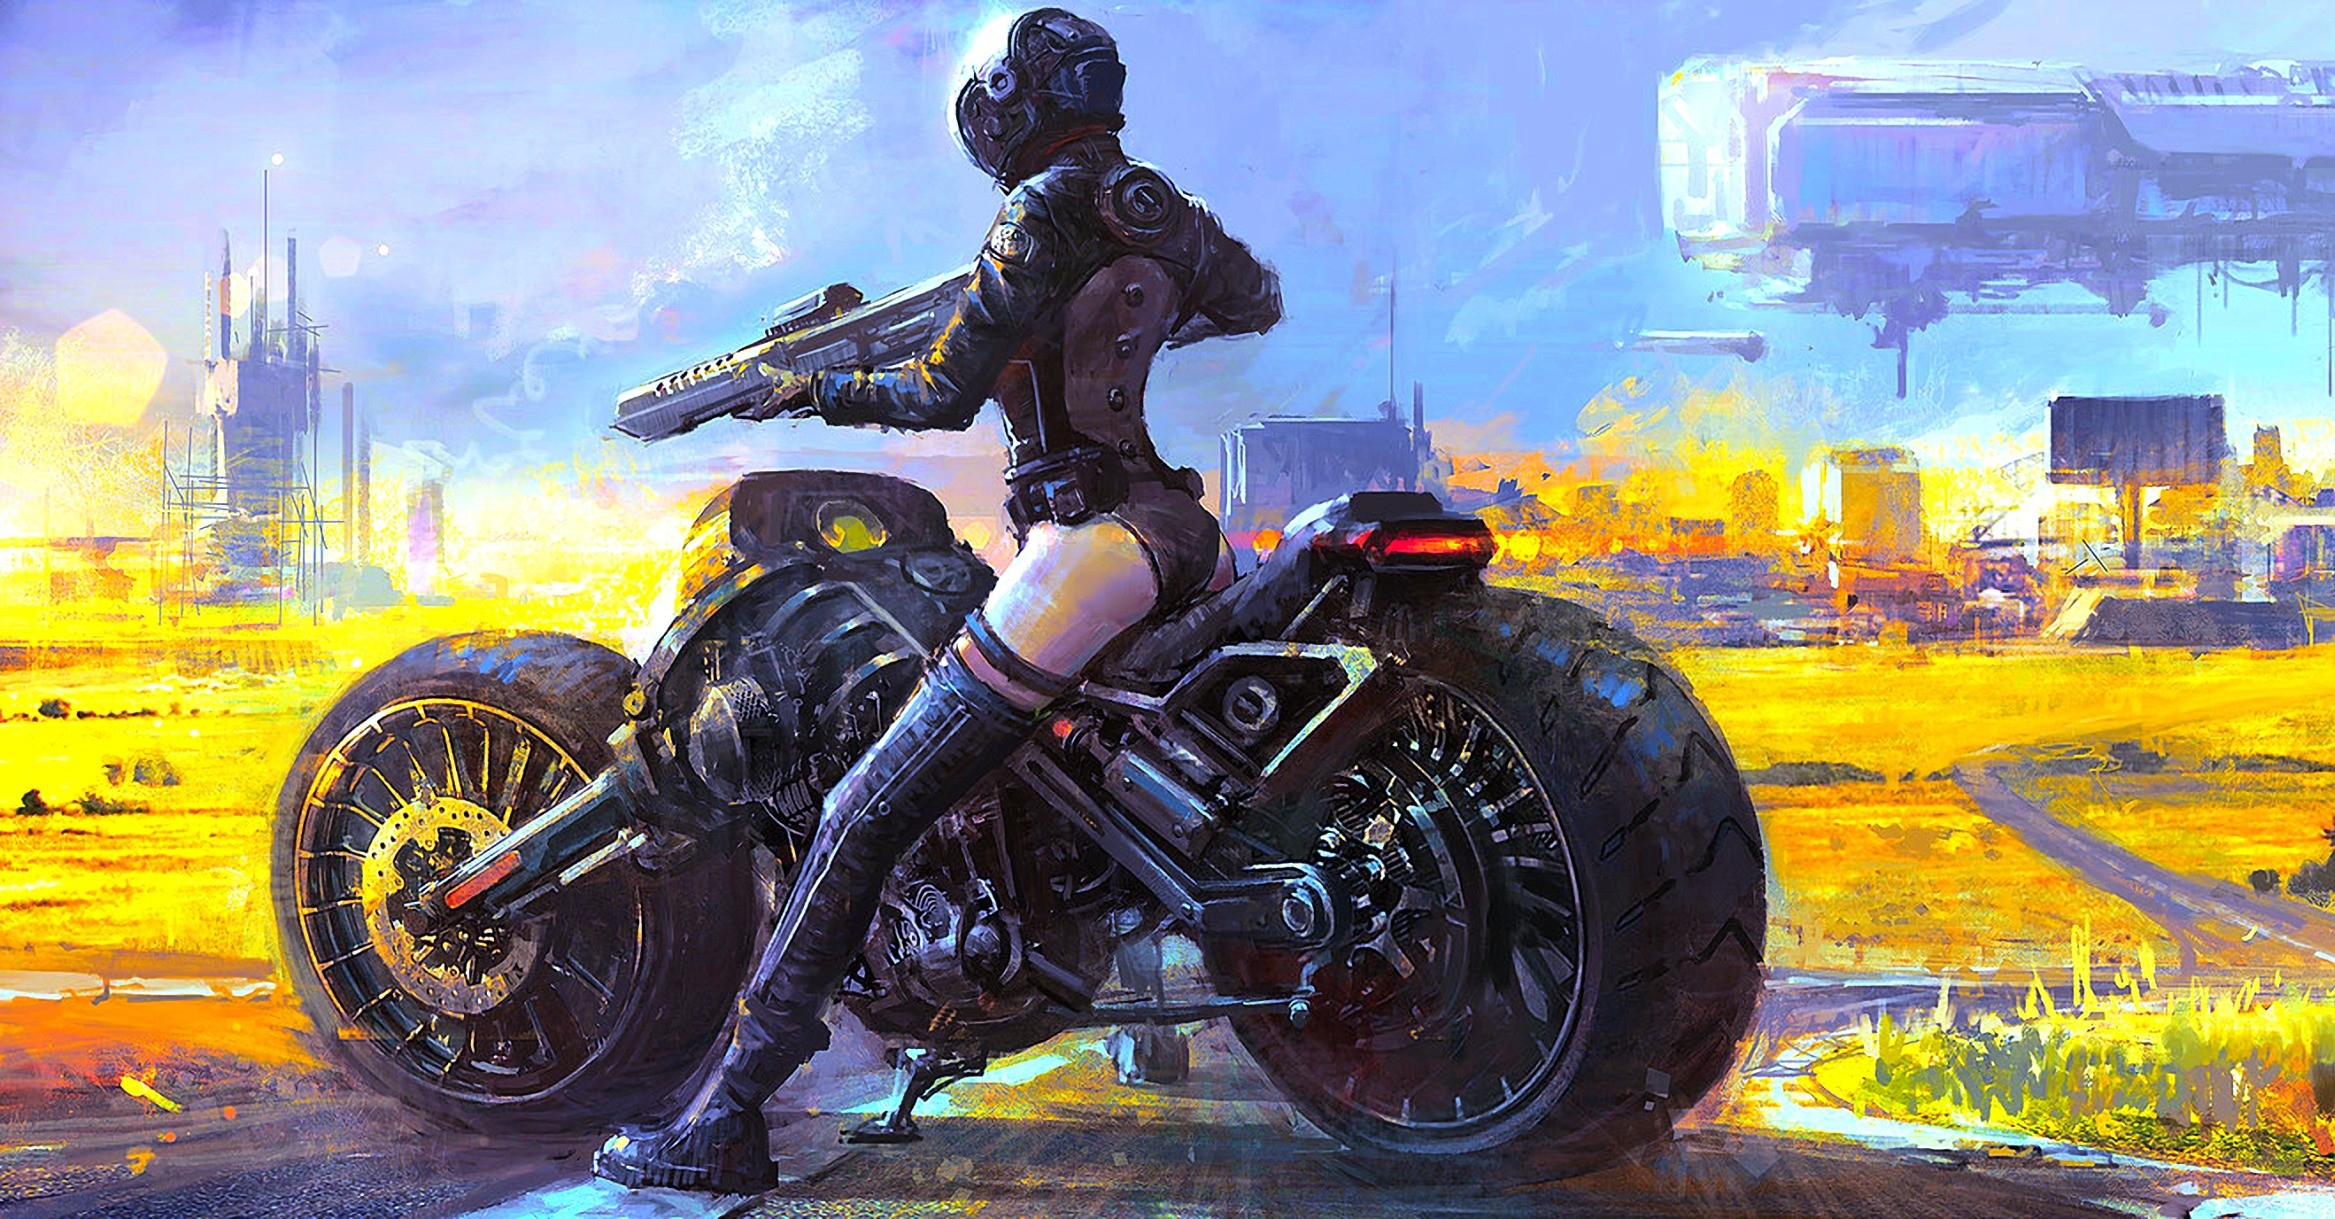 General 2335x1219 science fiction futuristic artwork vehicle motorcycle girls with guns science fiction women women with motorcycles black motorcycles weapon women